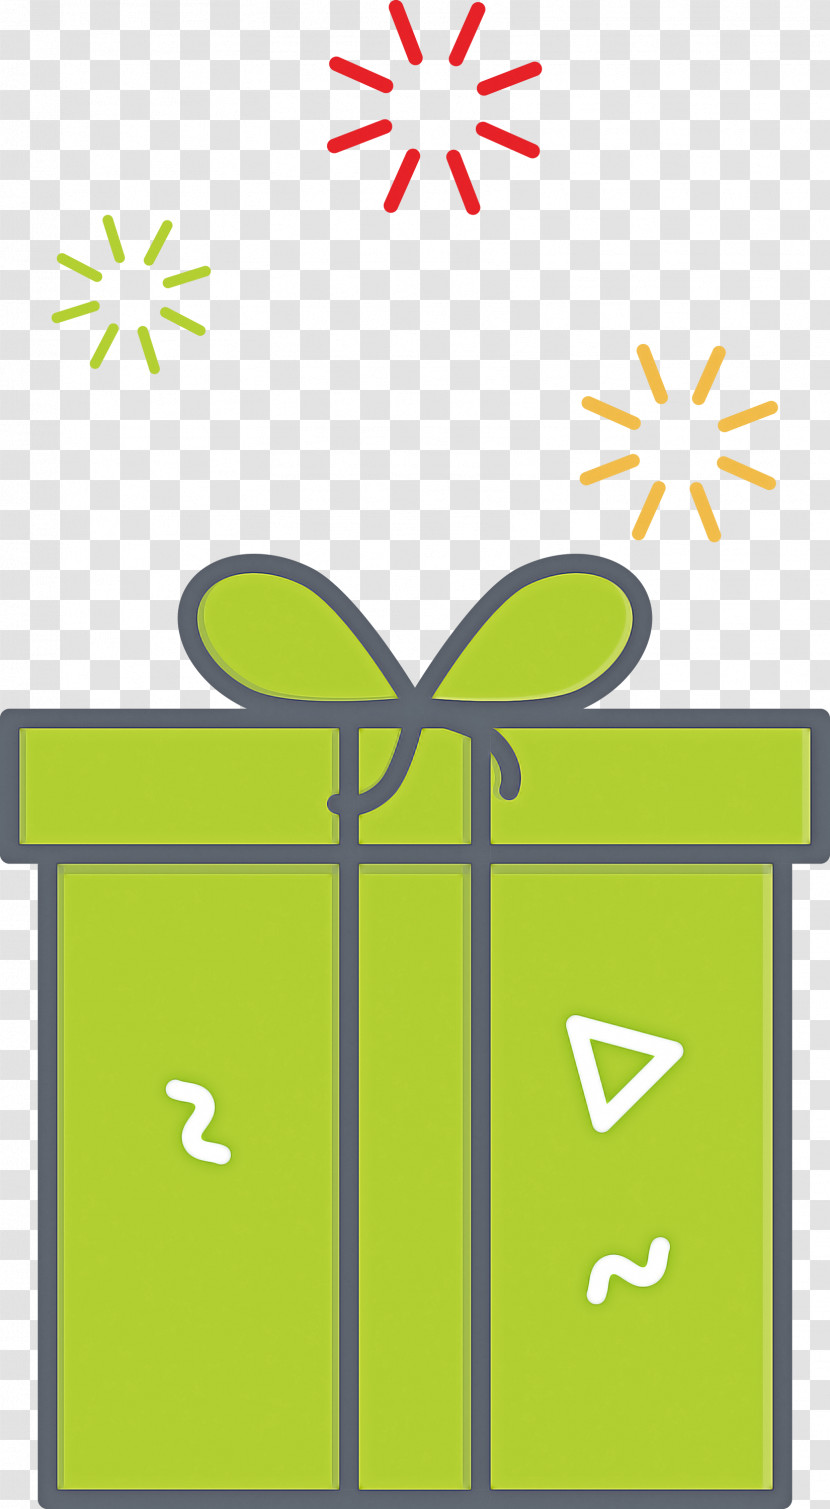 Happy New Year Gifts Transparent PNG